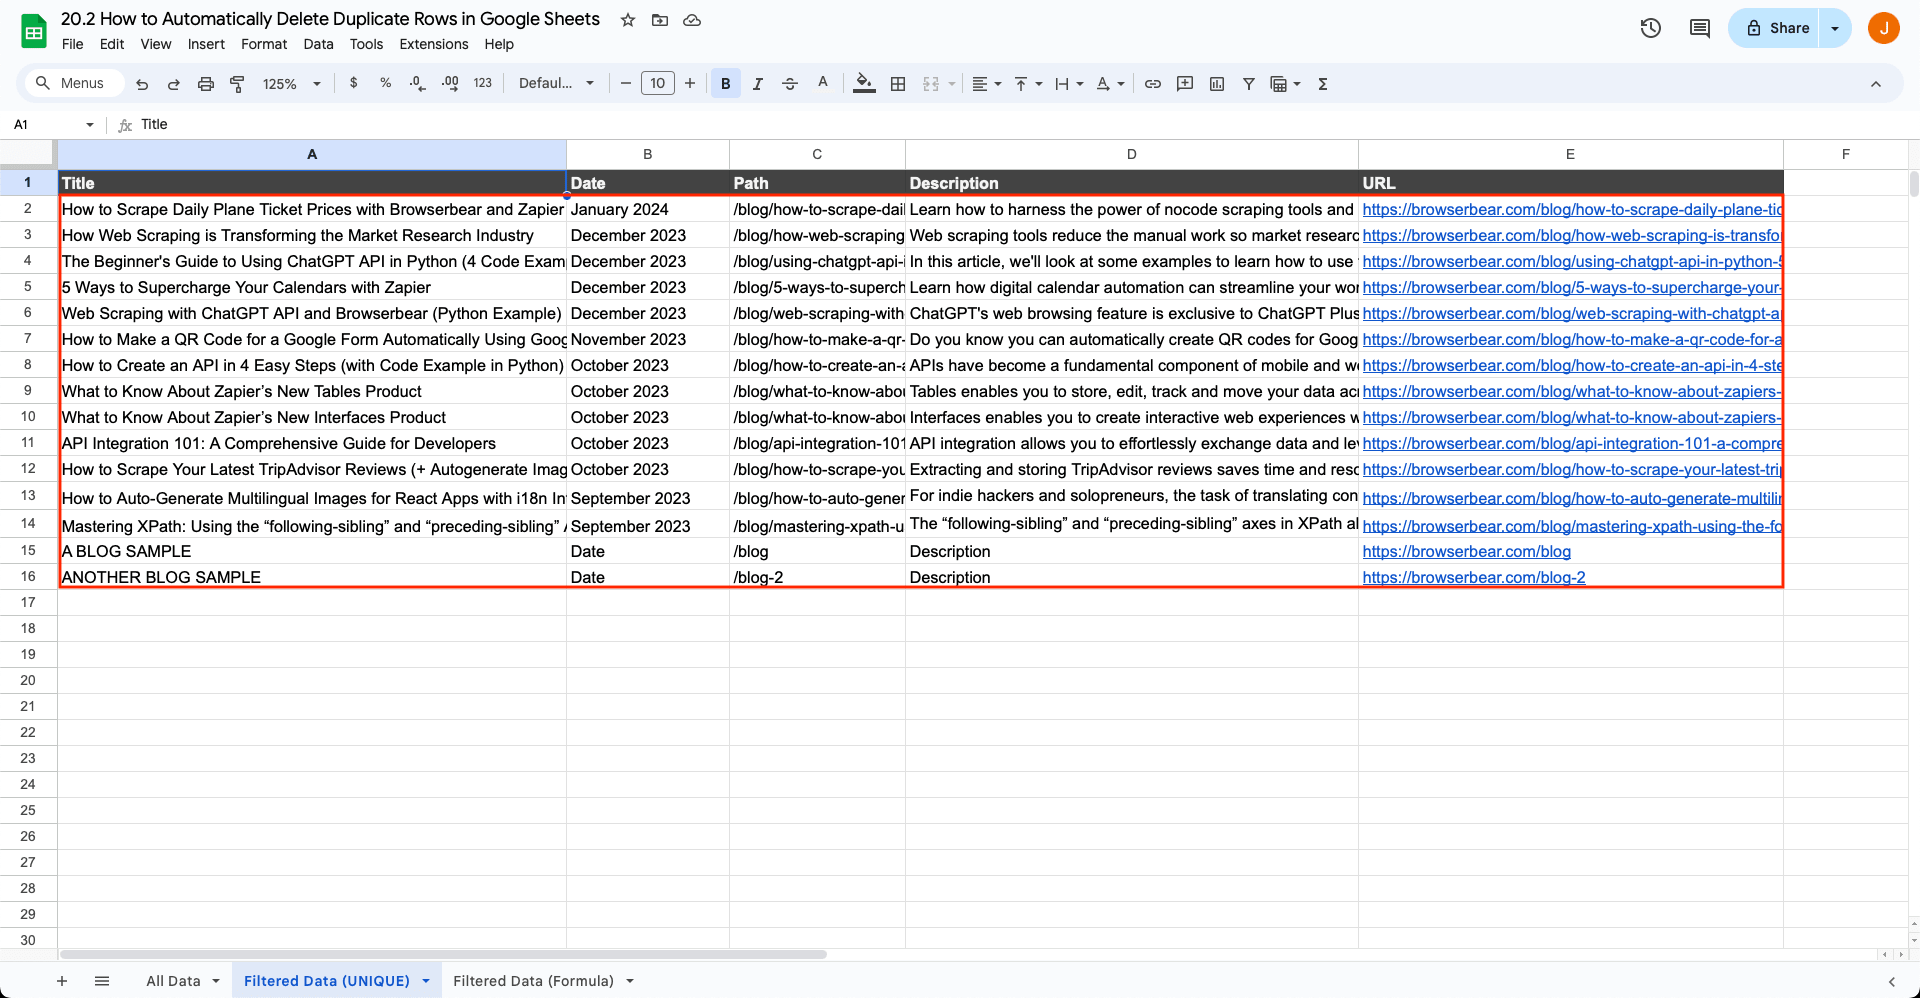 Screenshot of Google Sheets filtered data table with unique data outlined in red